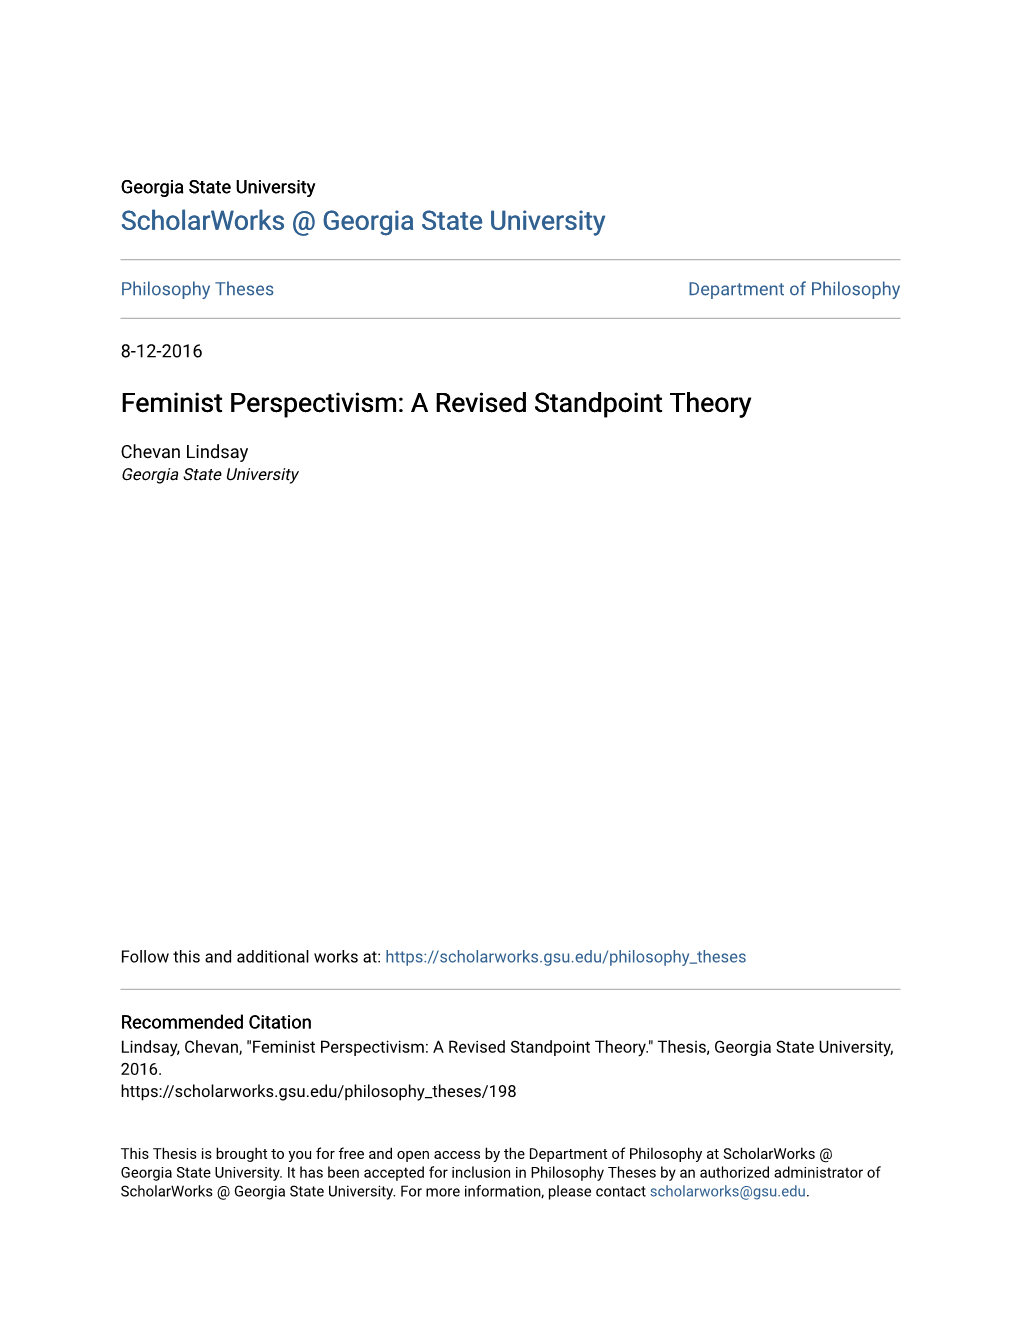 Feminist Perspectivism: a Revised Standpoint Theory